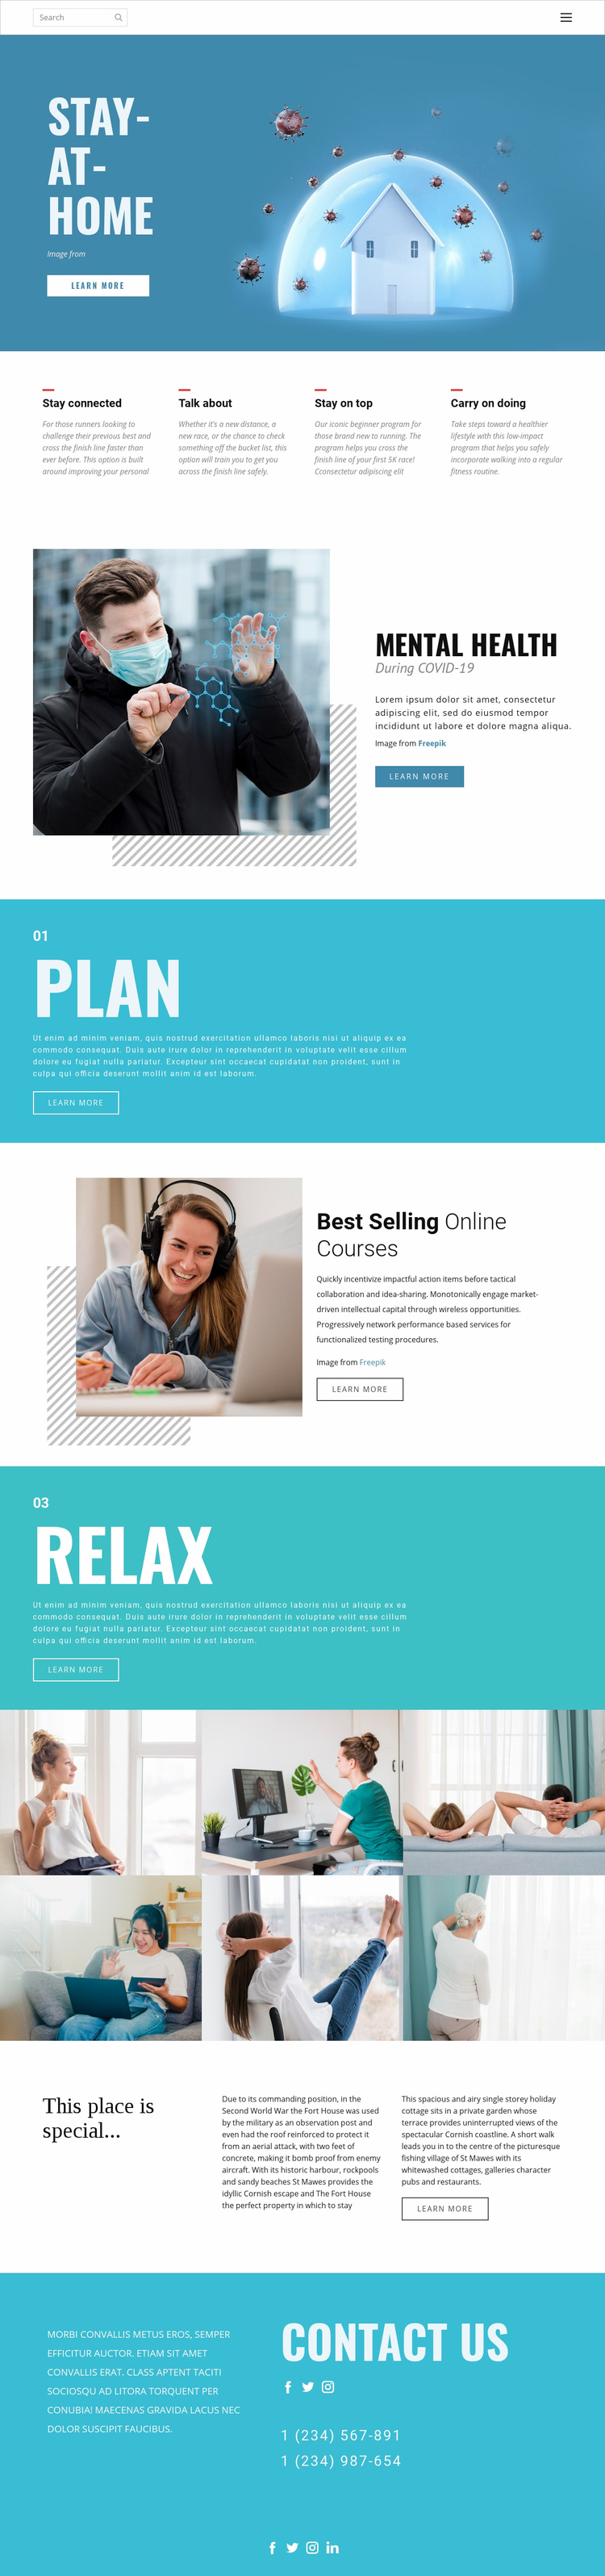 Stay-at-home medicine Squarespace Template Alternative